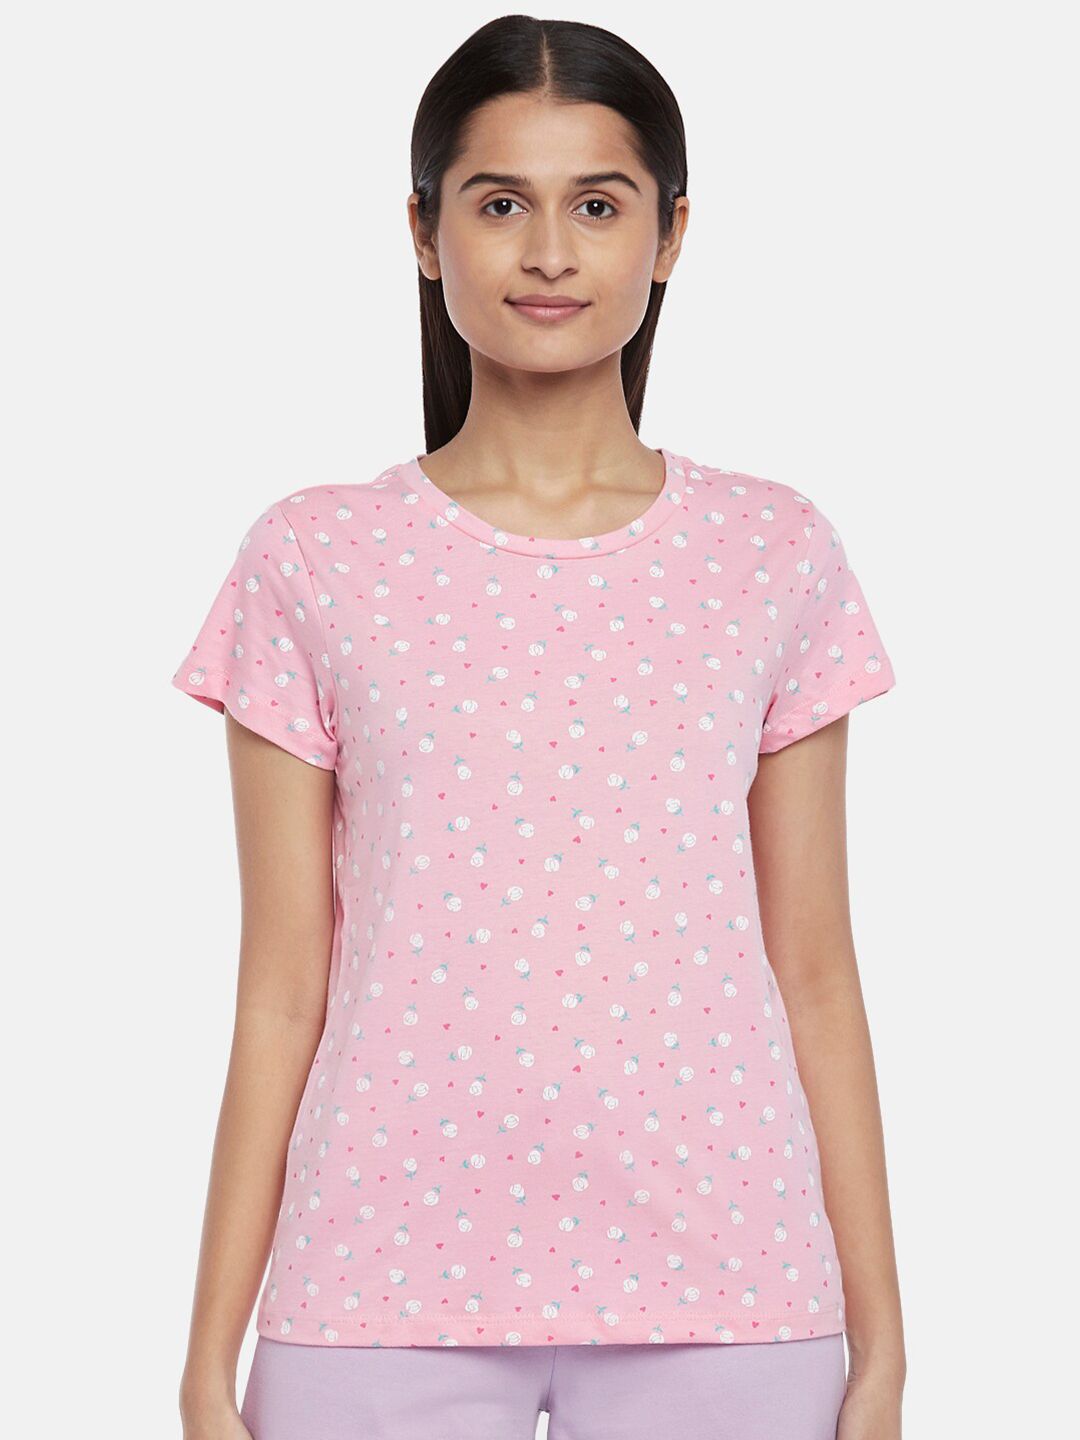 Dreamz by Pantaloons Pink Print Lounge tshirt Price in India